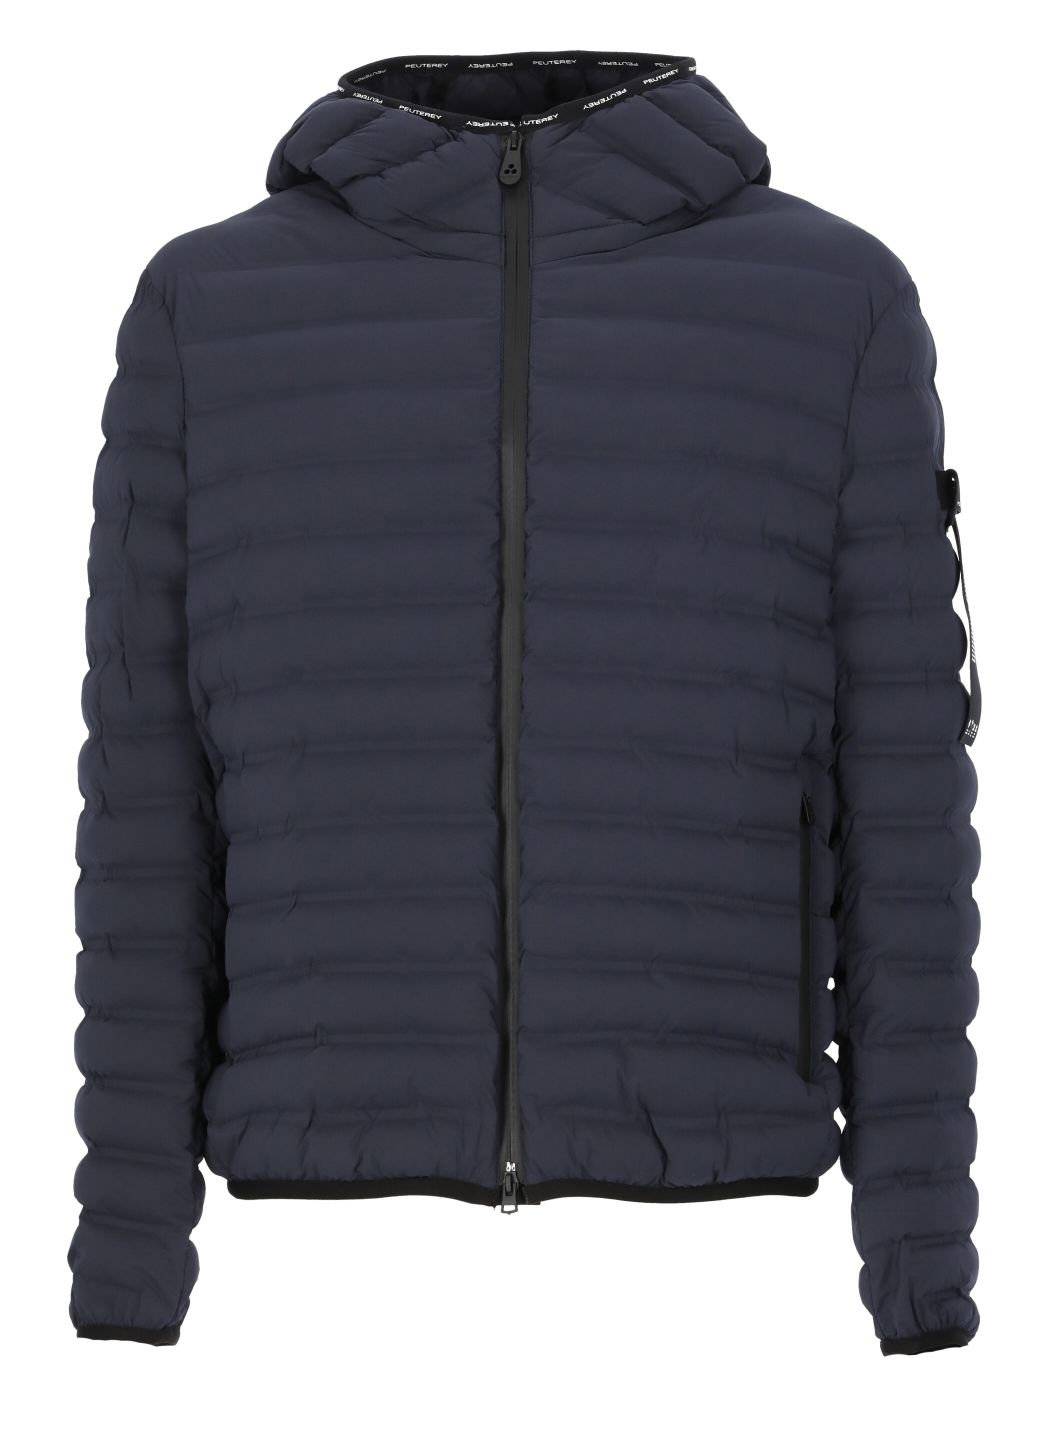 Juewa quilted down jacket